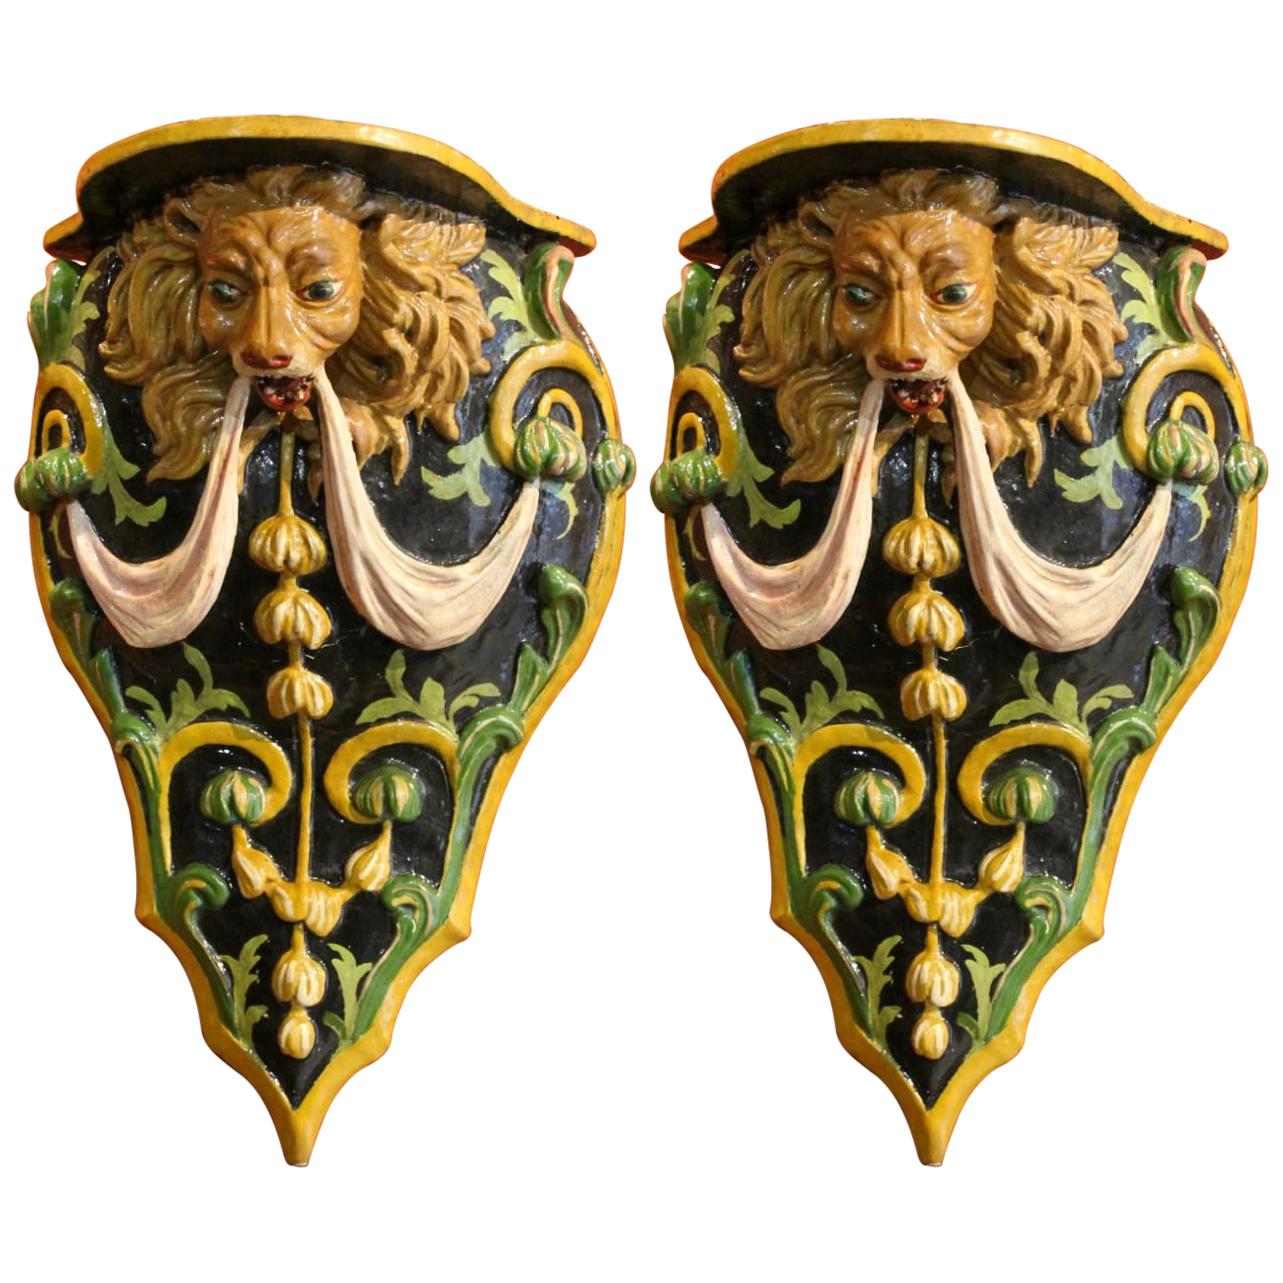 Italian 19th Century Hand Carved and Lacquer Wood Wall Brackets with Lion Heads